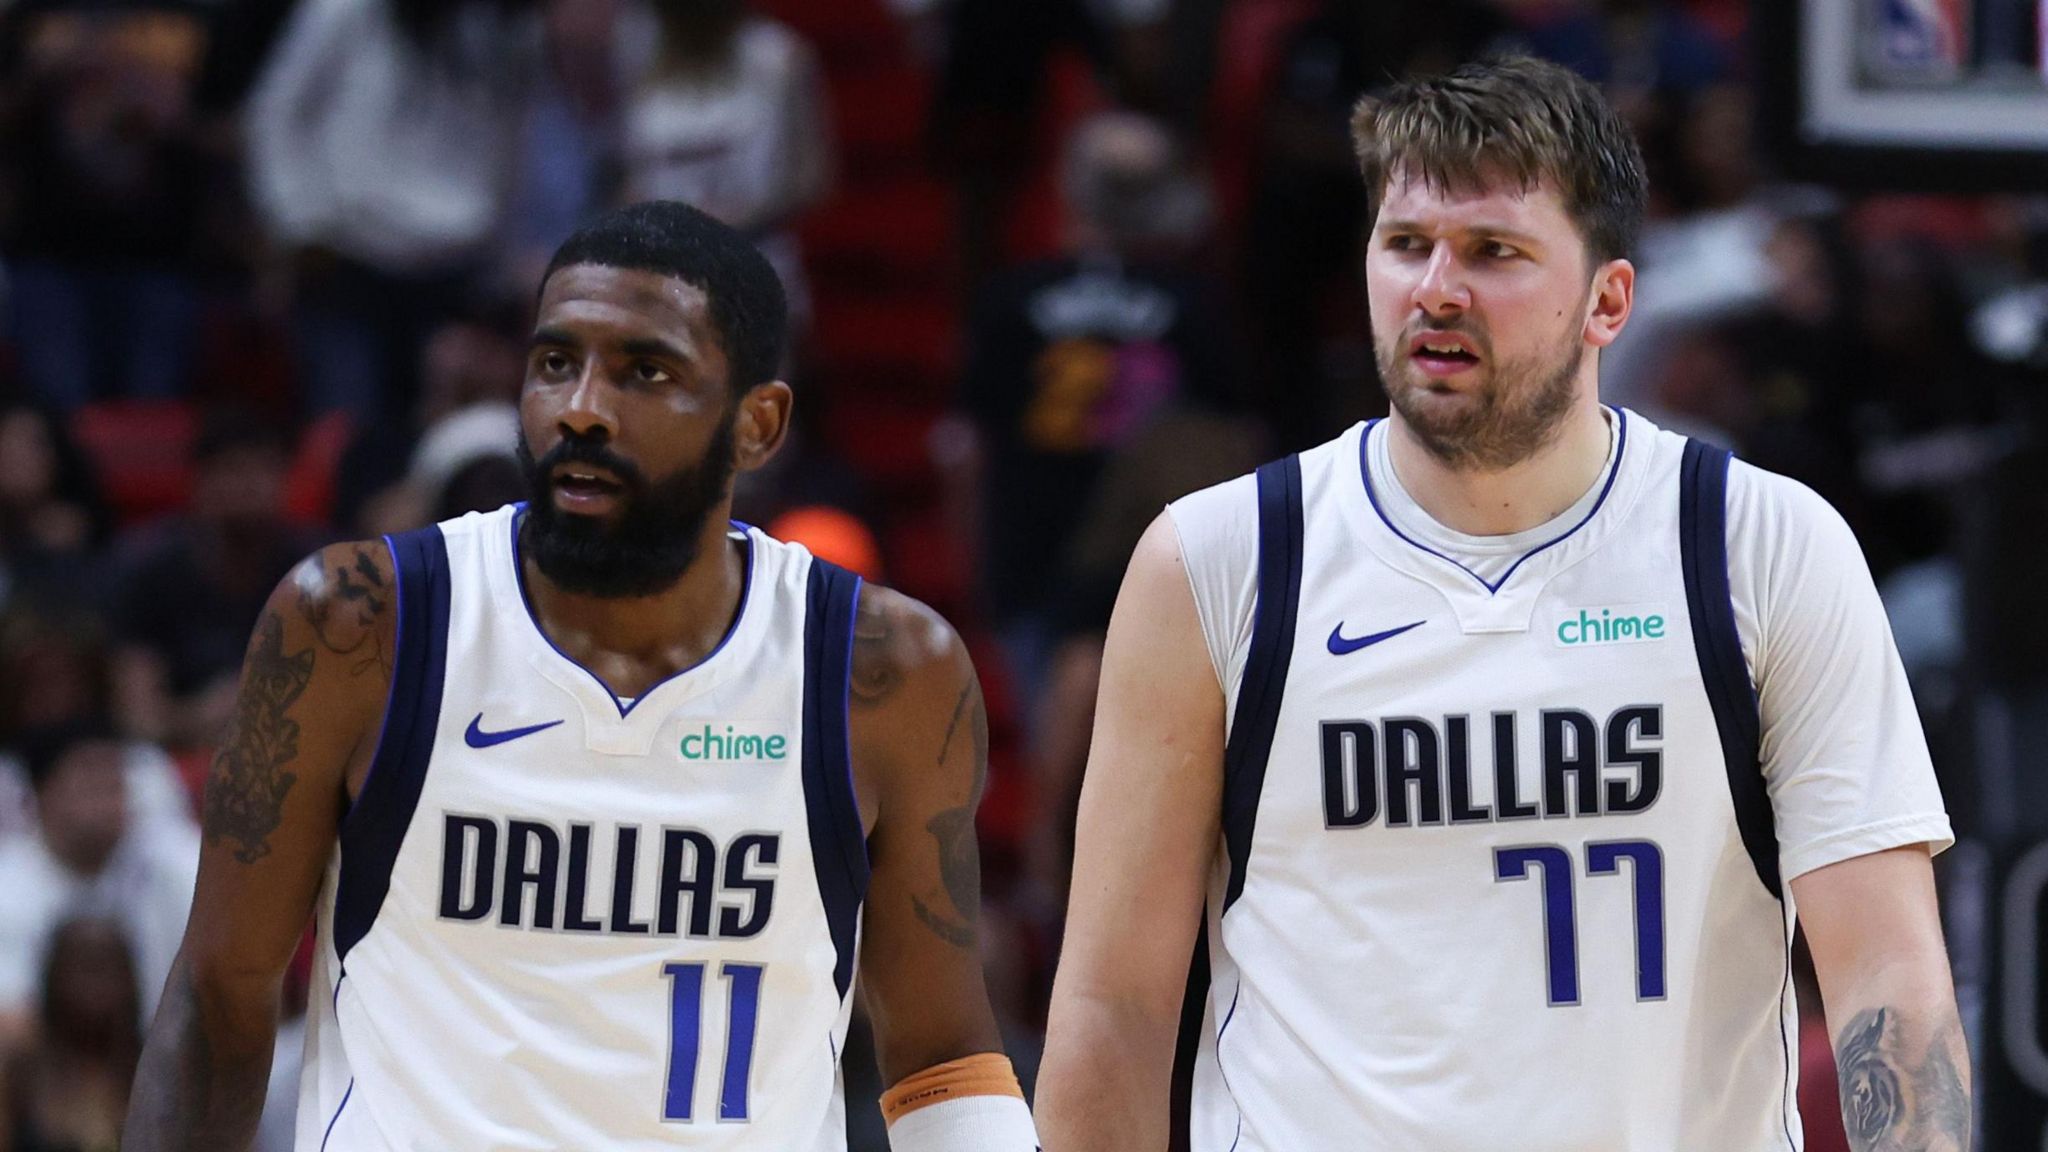 Kyrie Irving stands next to Luka Doncic